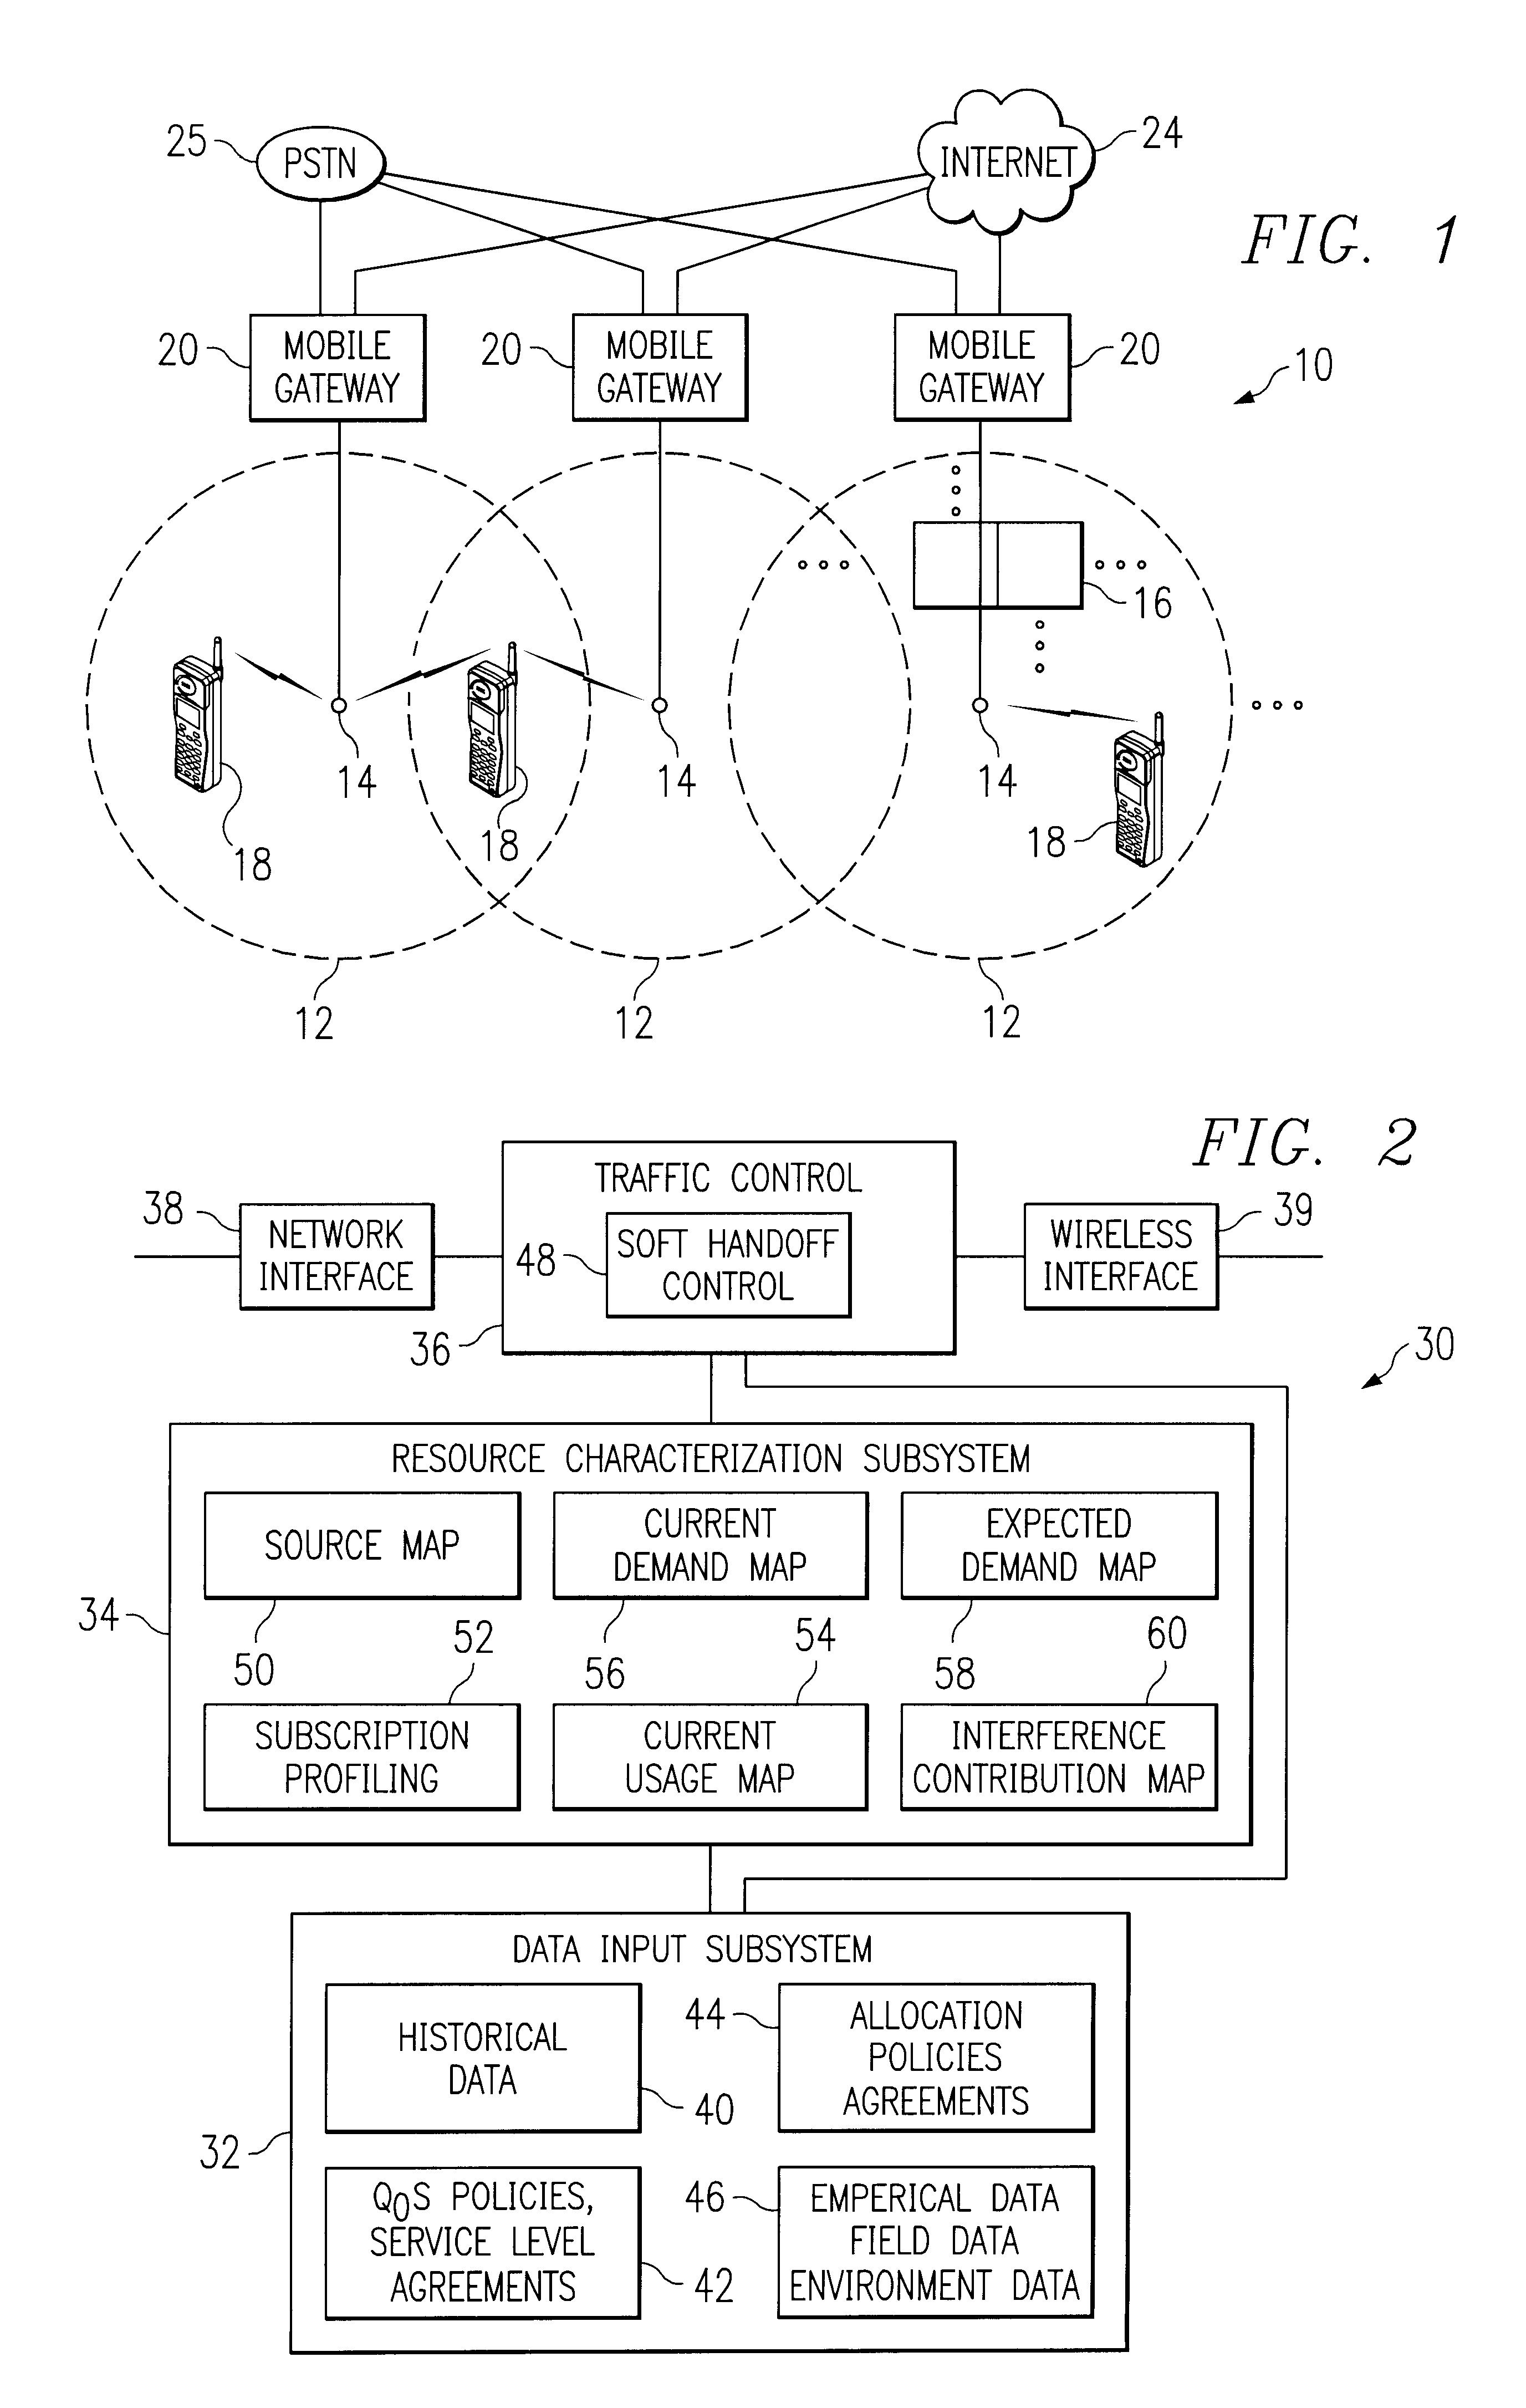 Method and system for dynamic soft handoff resource allocation in a wireless network